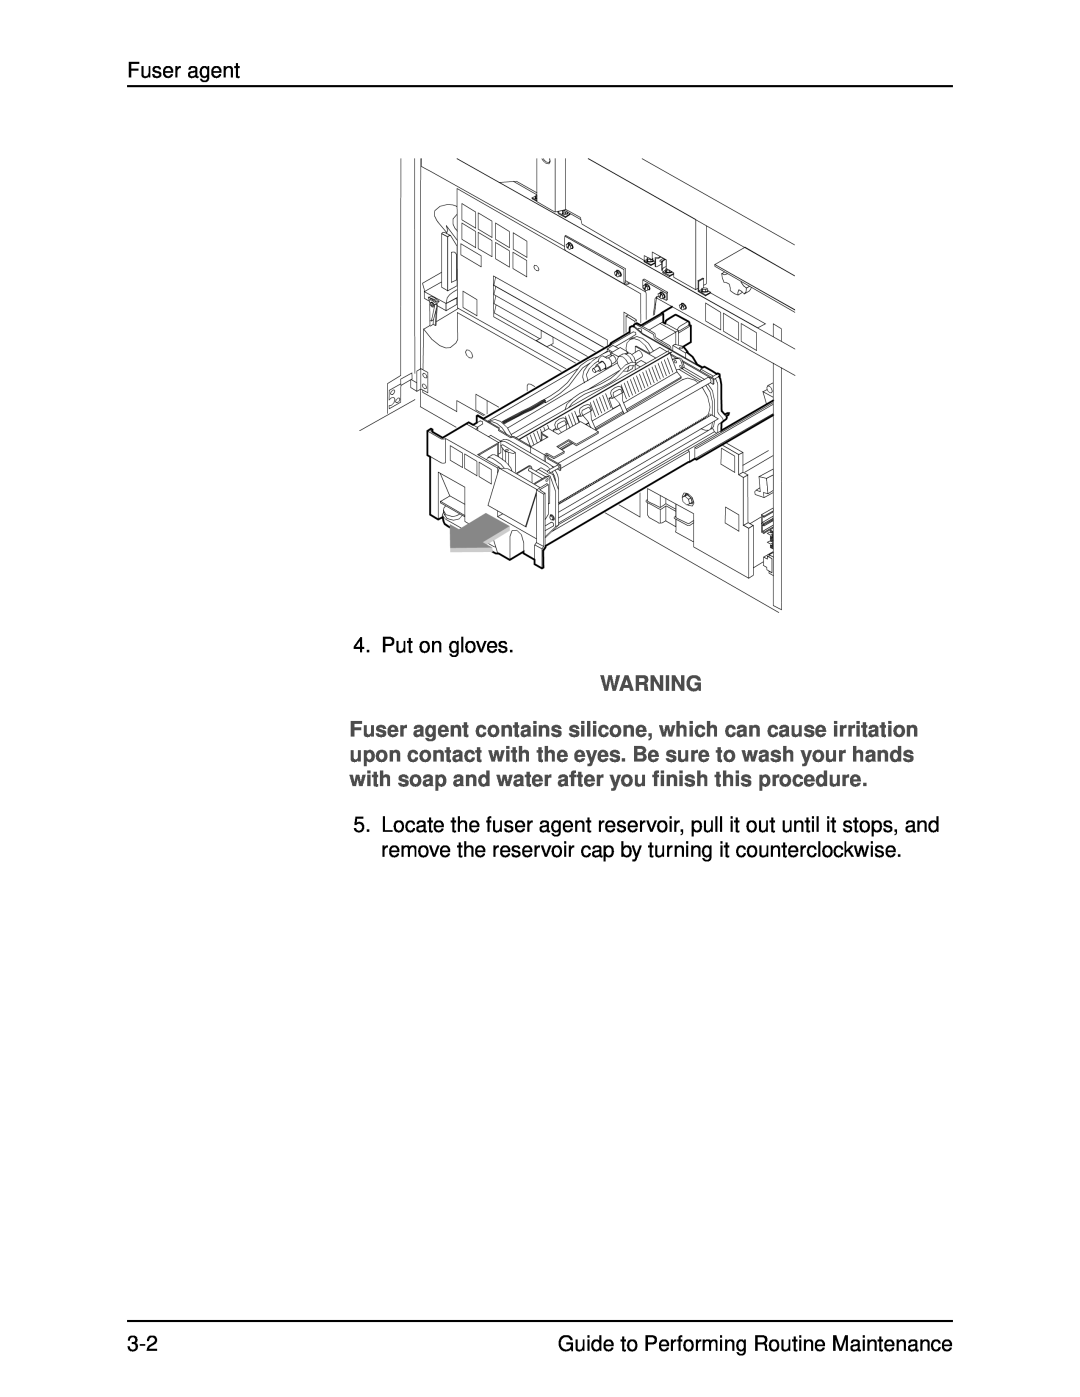 Xerox DocuPrint 96 manual Fuser agent, Put on gloves, Guide to Performing Routine Maintenance 